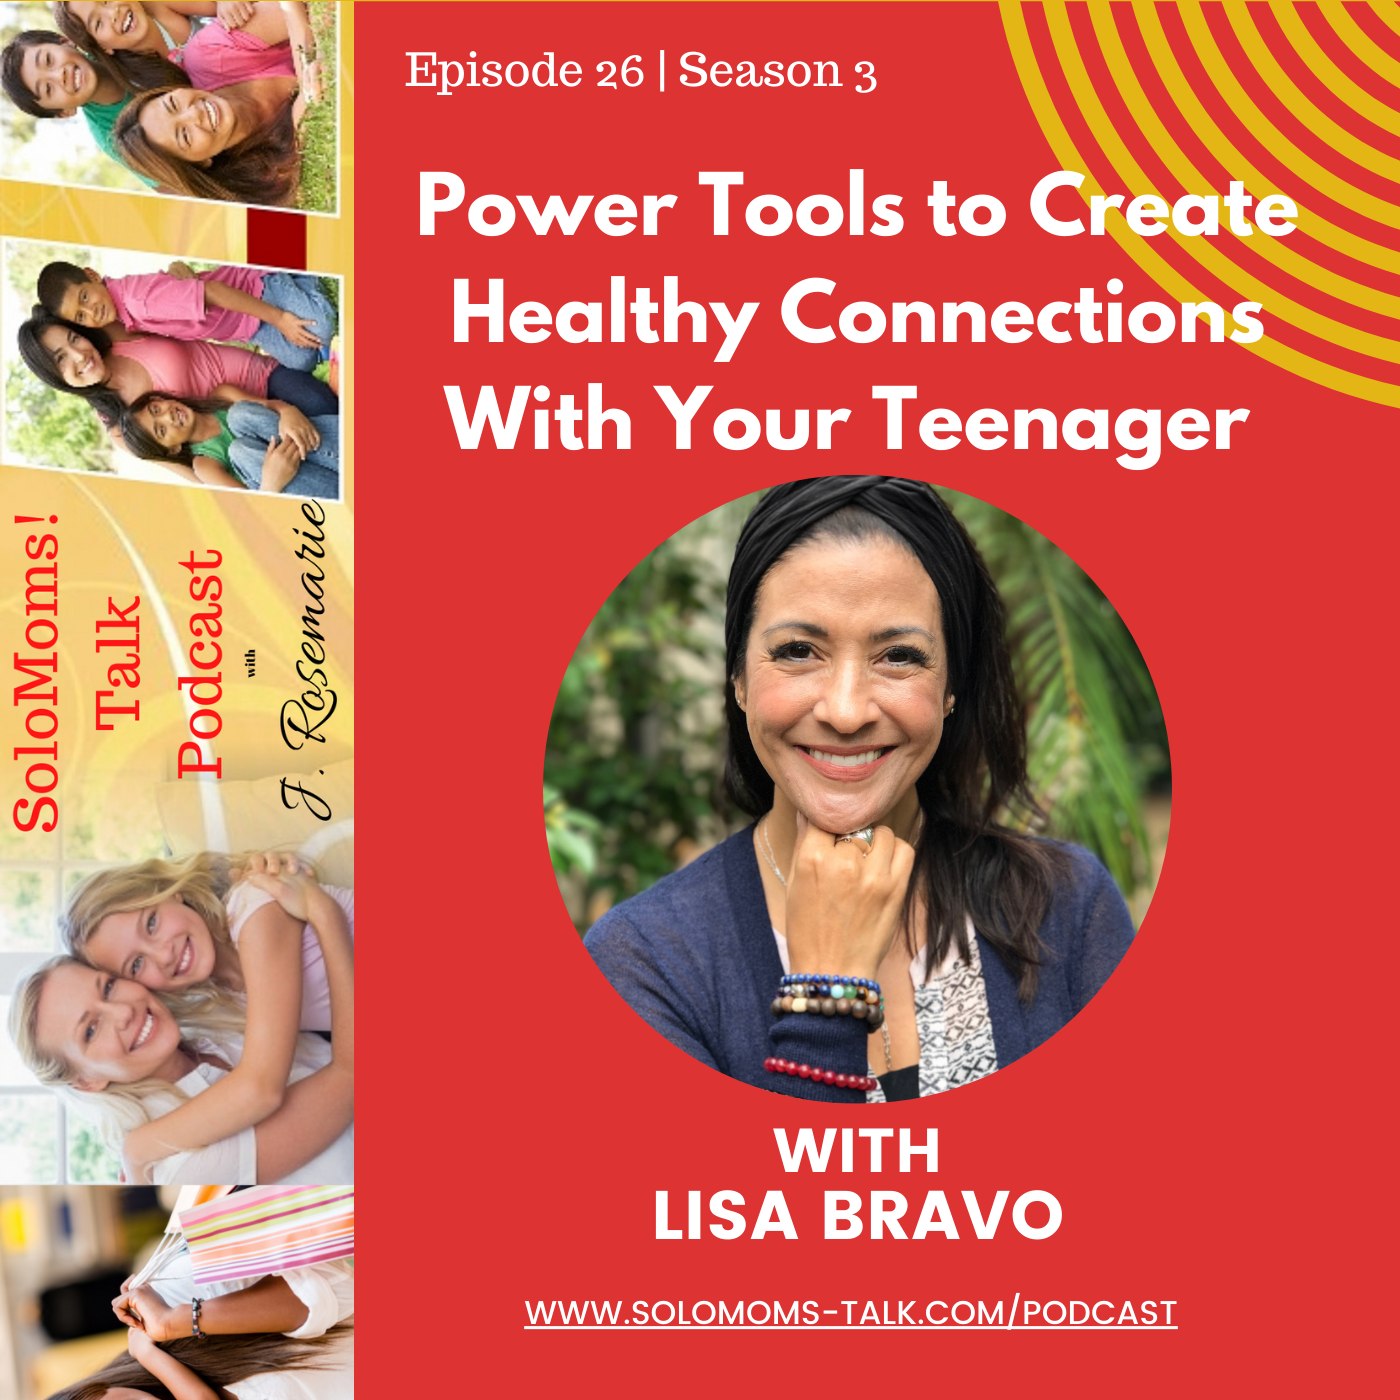 Power Tools to Create Healthy Connections With Your Teen - Dr. Lisa Bravo